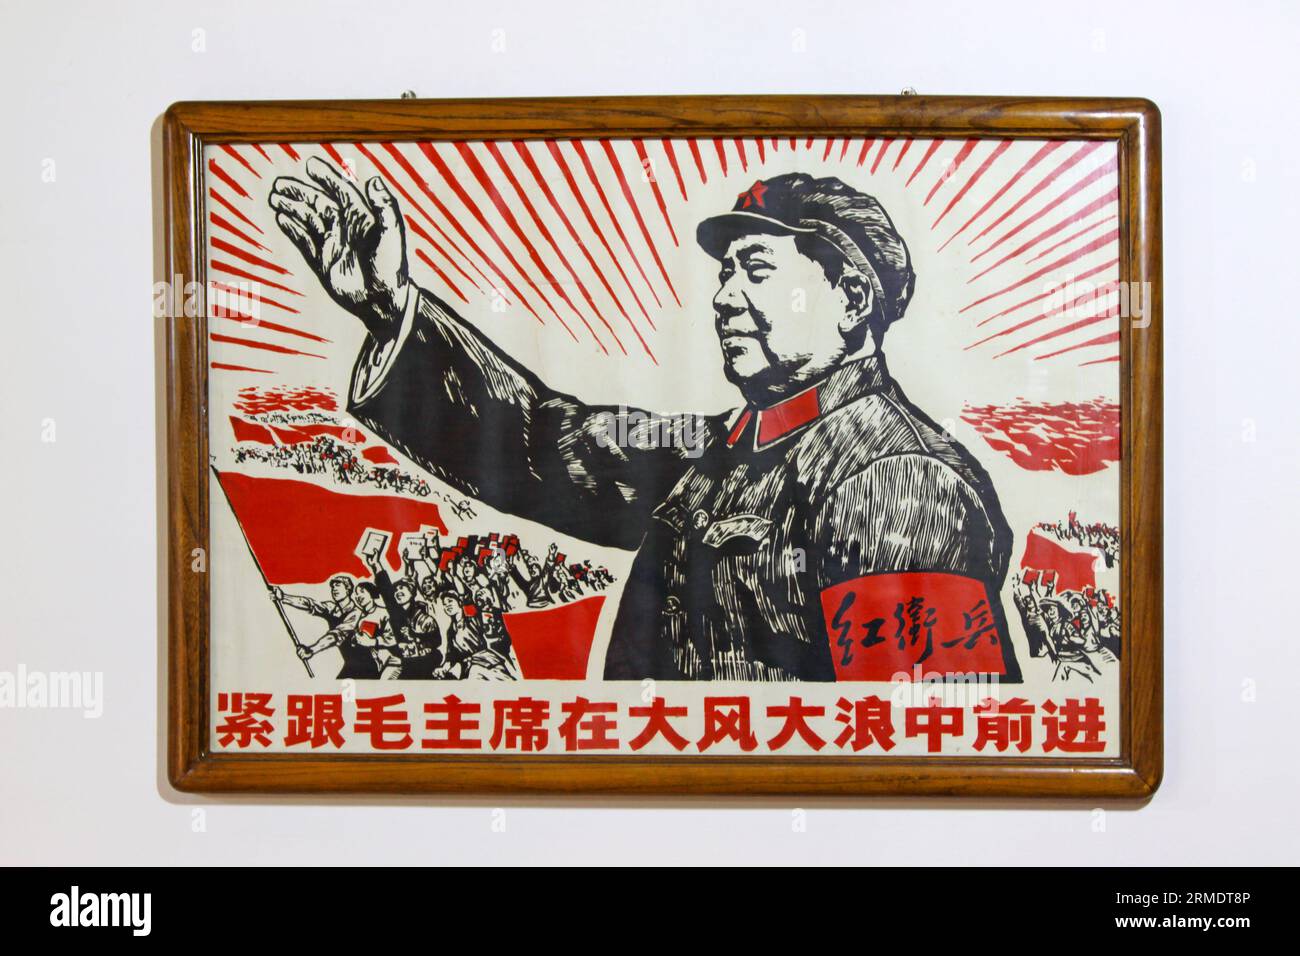 Qinhuangdao, December 8, 2012: Portrait of Mao Zedong, comic of China during the cultural revolution, in Jifa agricultural sightseeing garden, Decembe Stock Photo